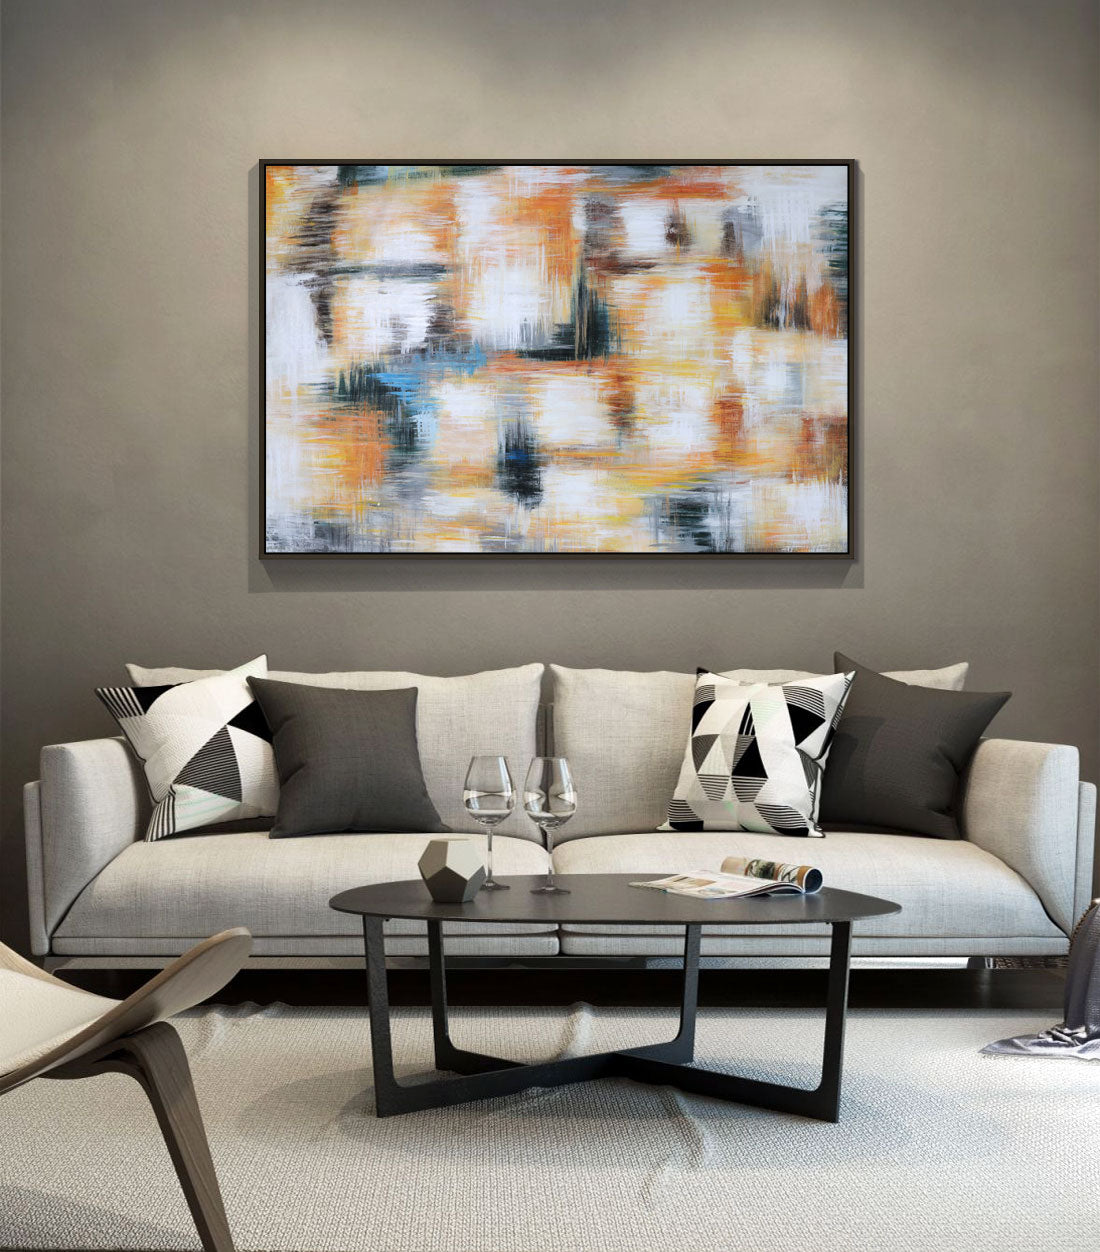 How To Decorate Your Living Room With Abstract Oil Paintings – Moda Living